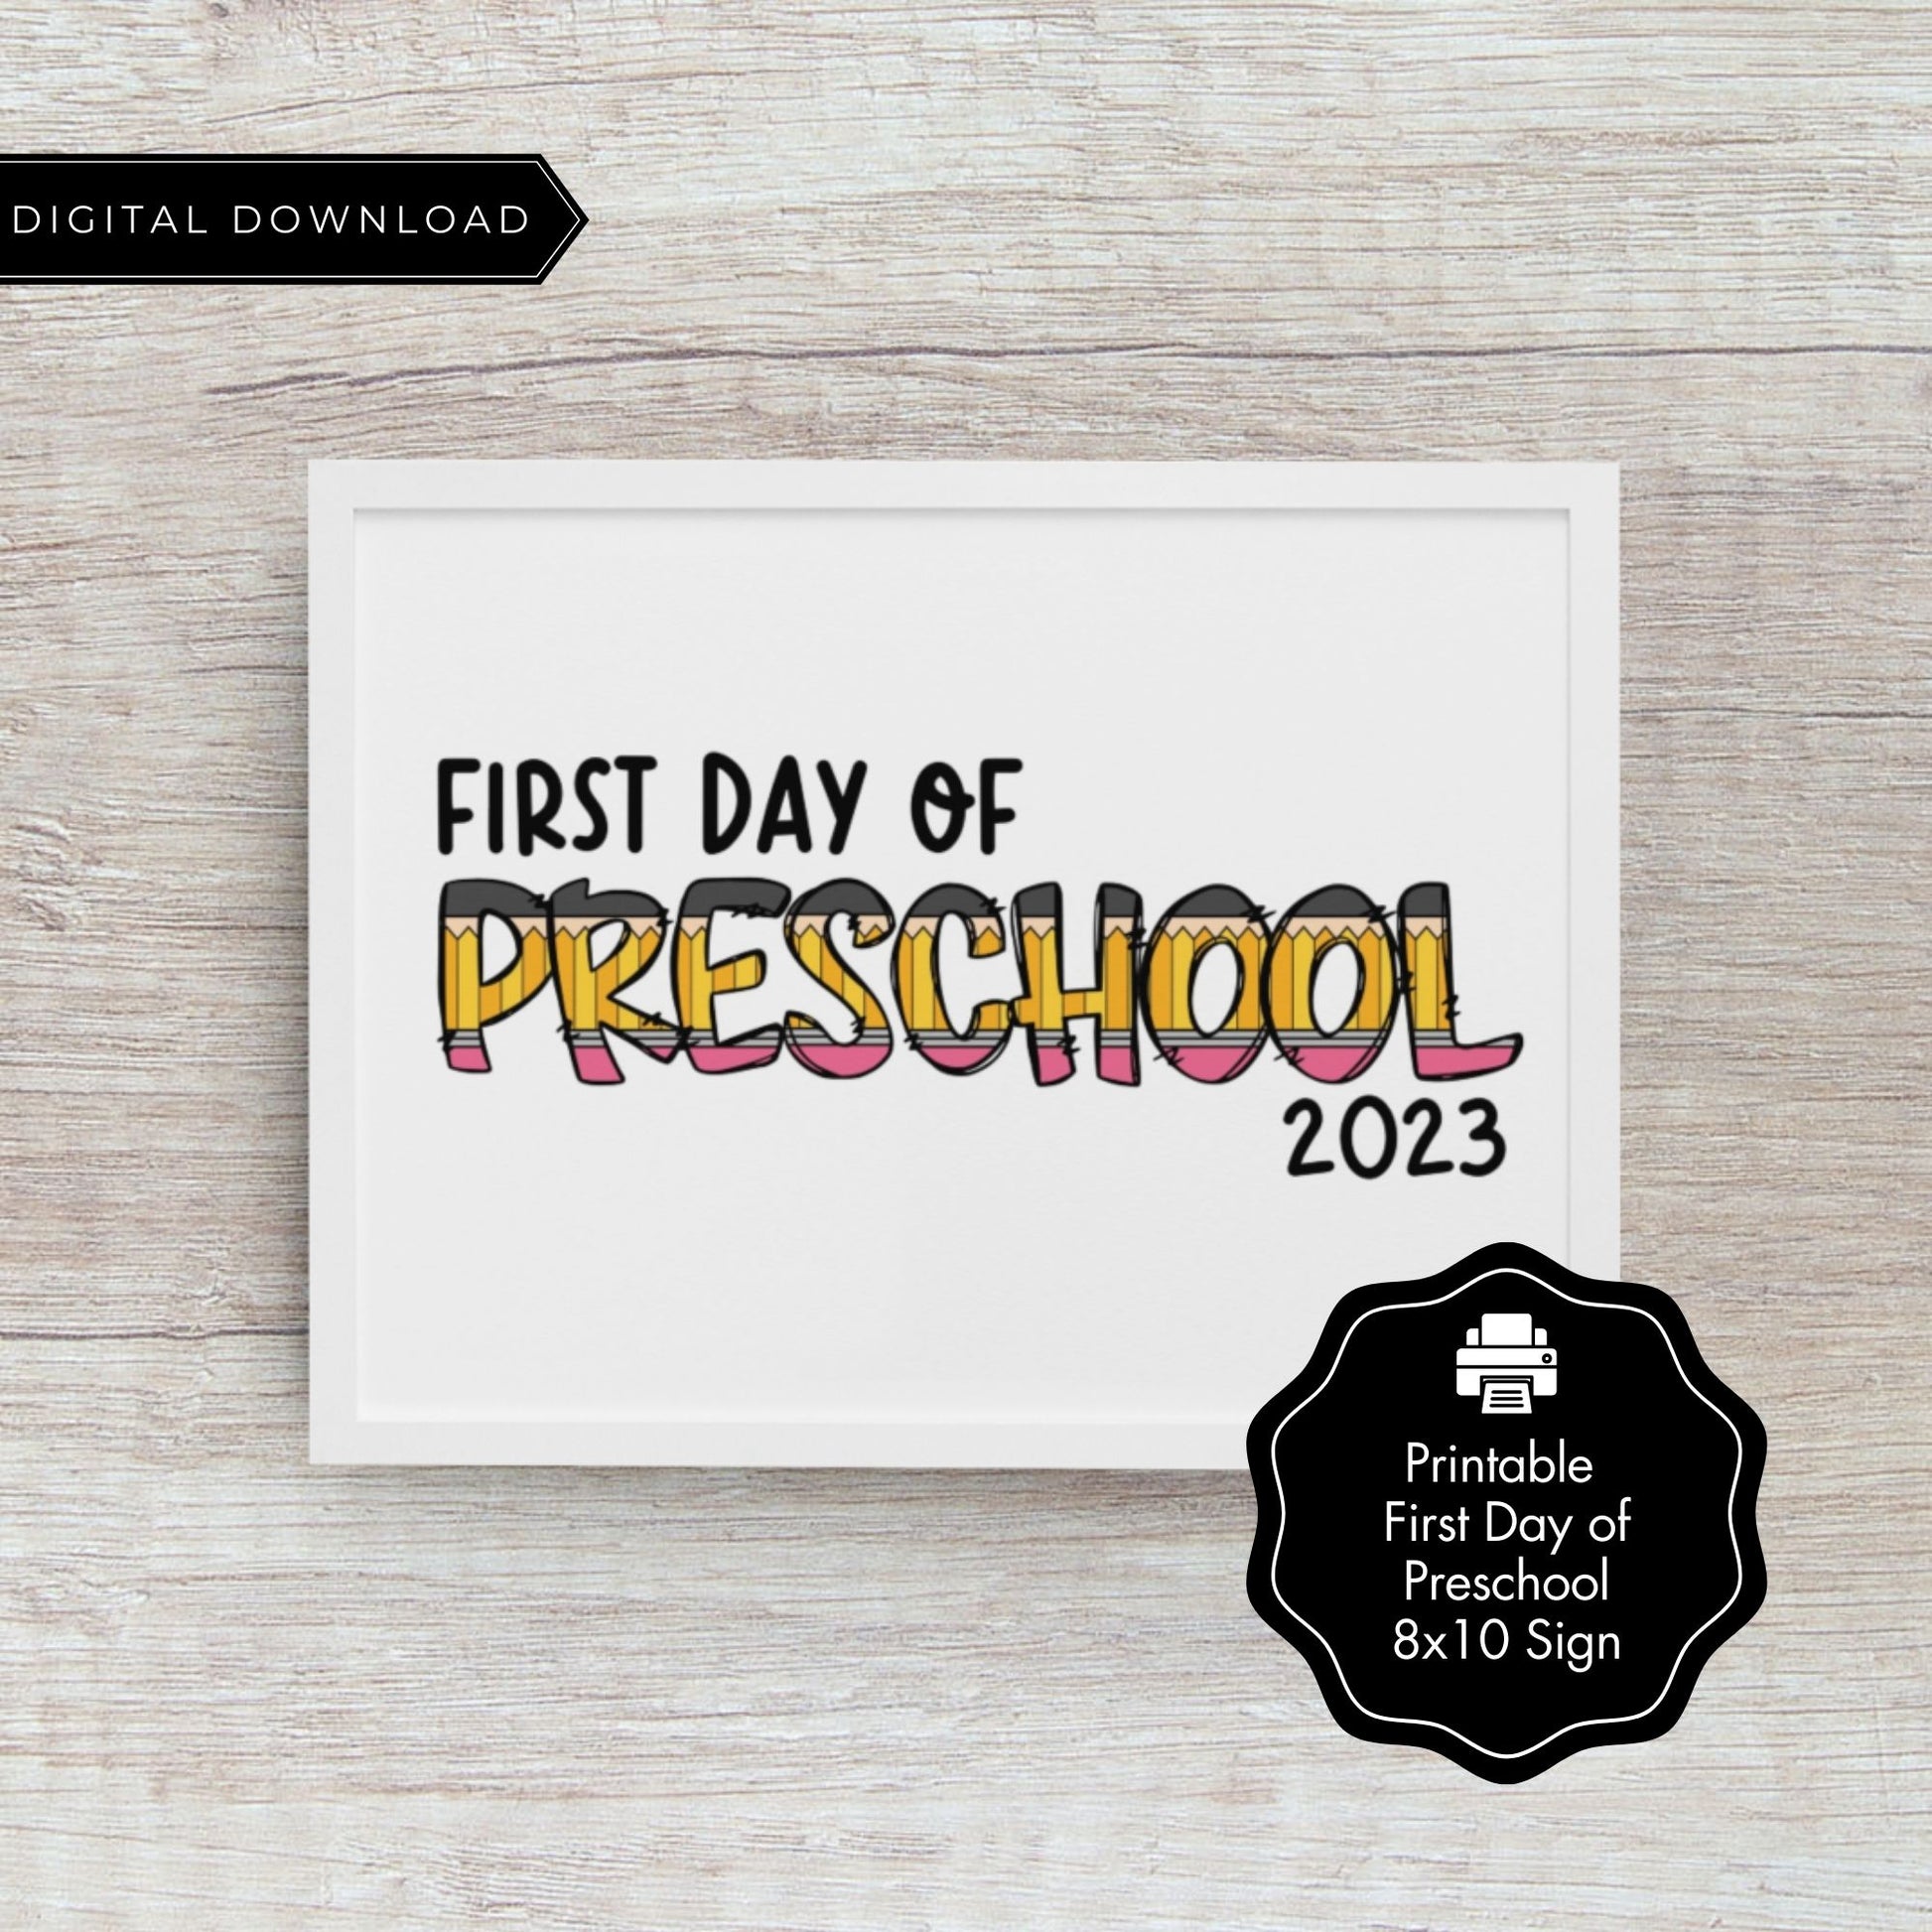 First Day of Preschool Sign Printable PDF 8x10